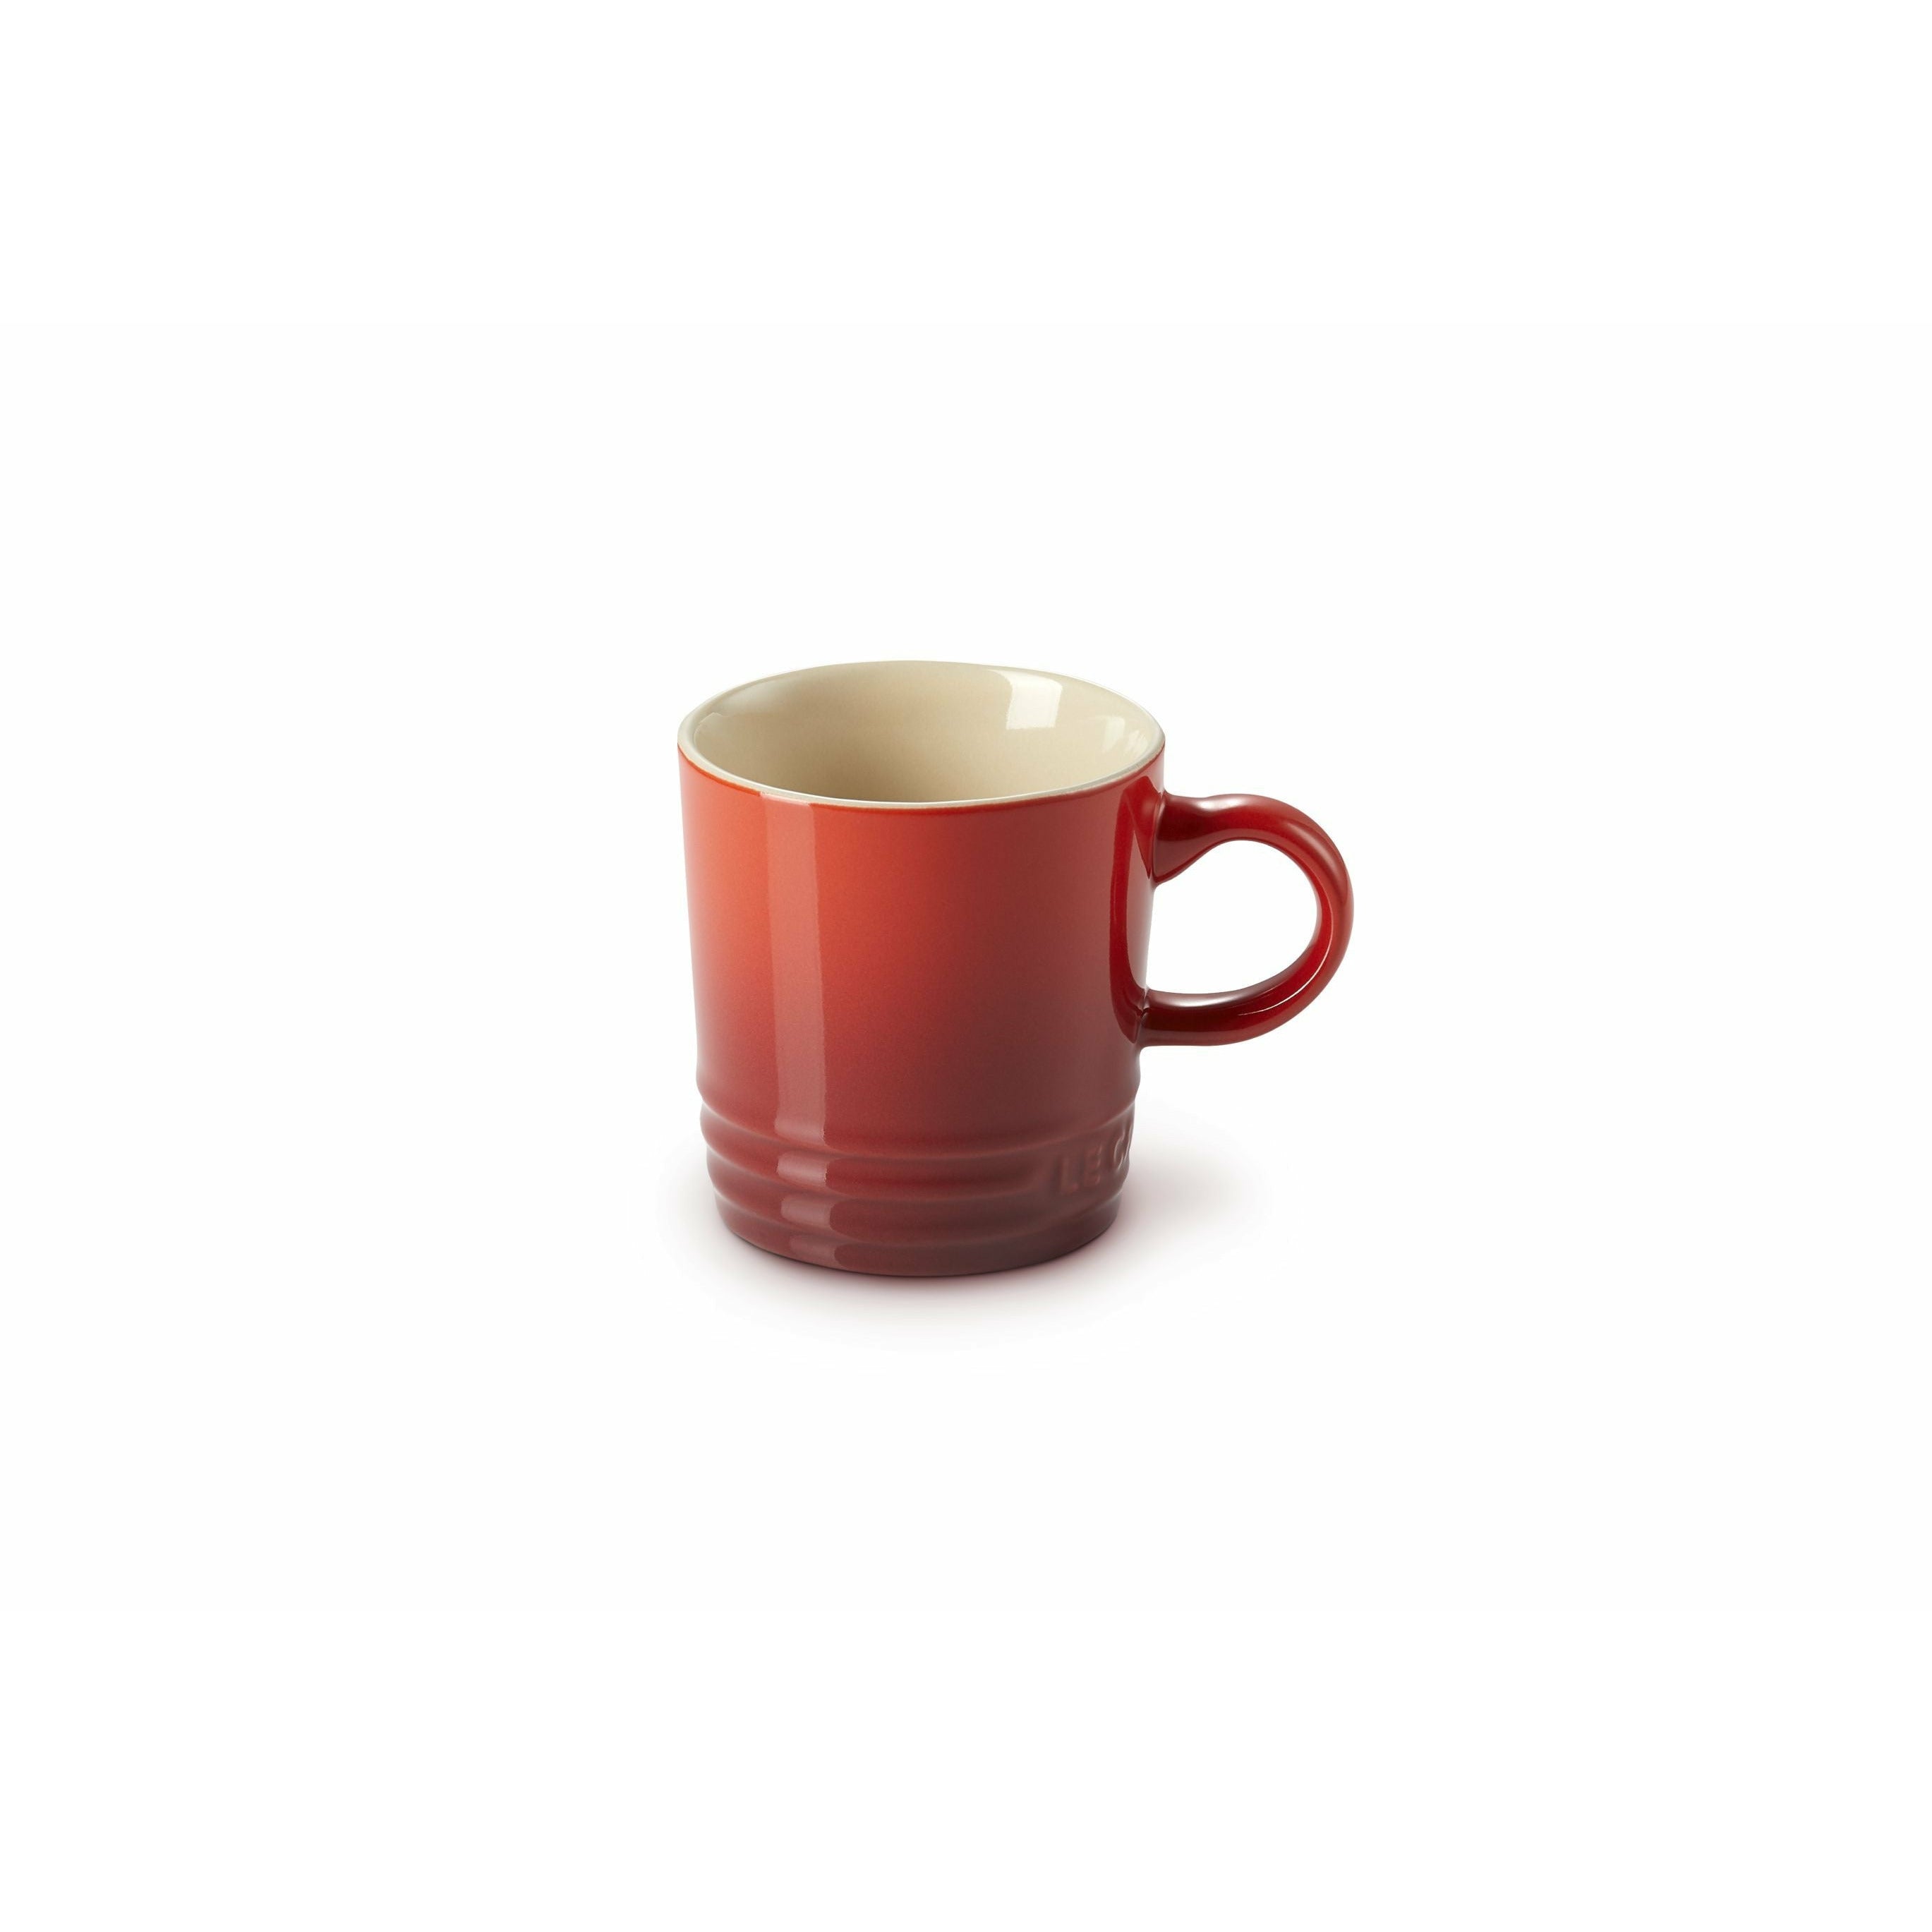 Le Creuset Espresso Cup 100 ml, Cherry Red